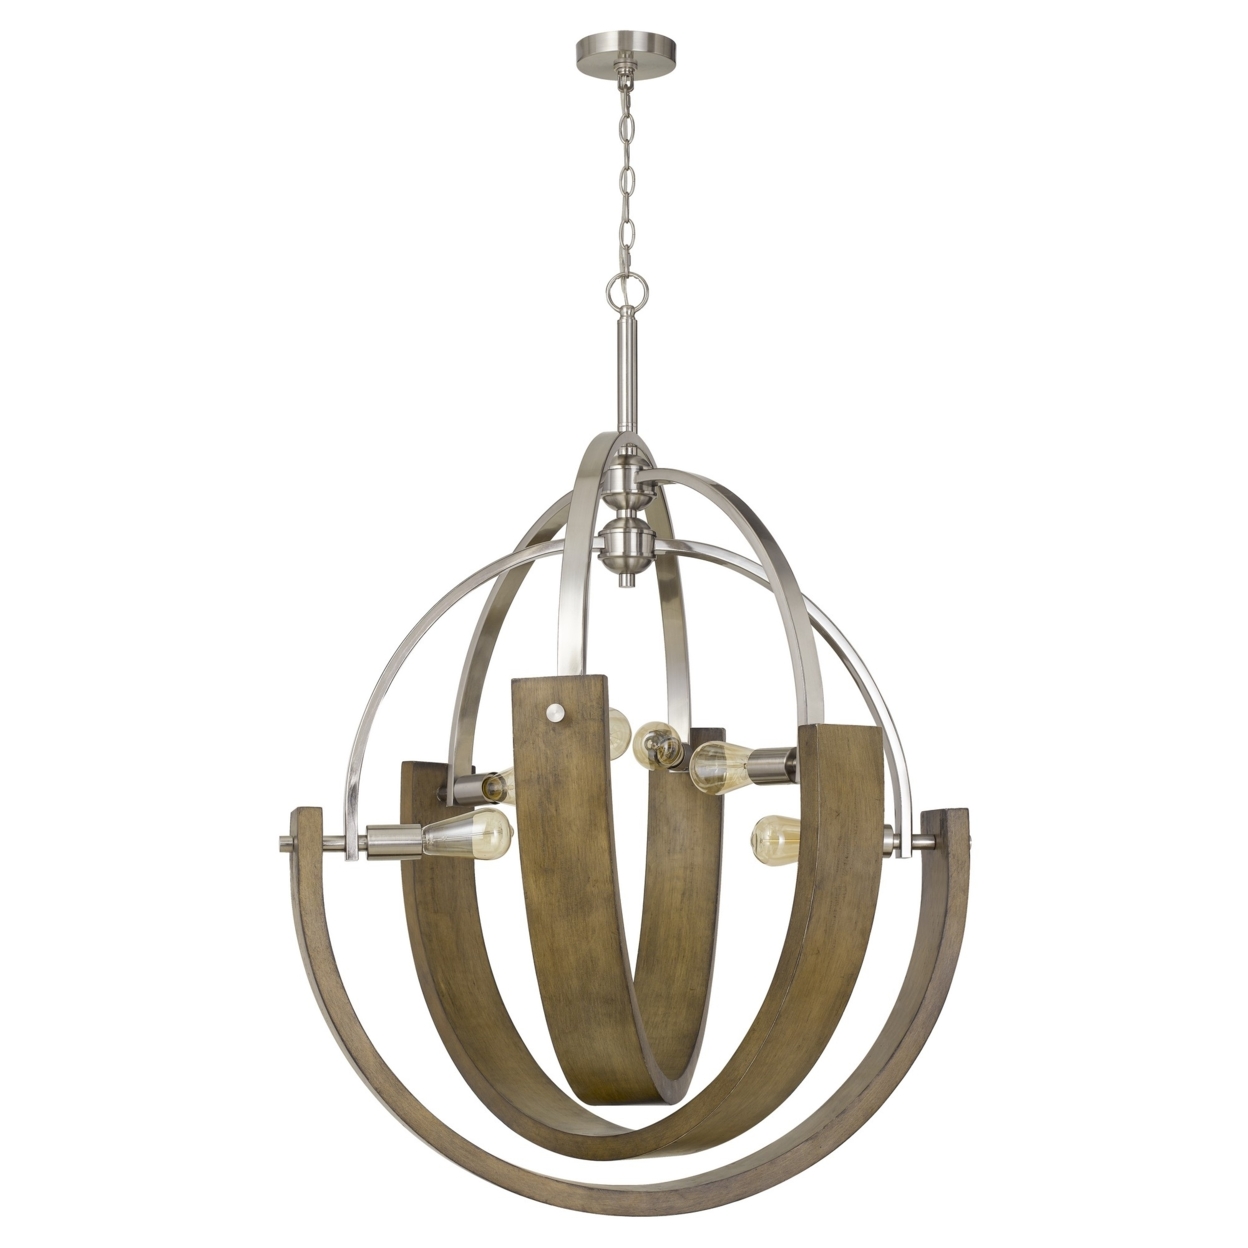 6 Bulb Metal And Wooden Chandelier, Silver And Brown- Saltoro Sherpi